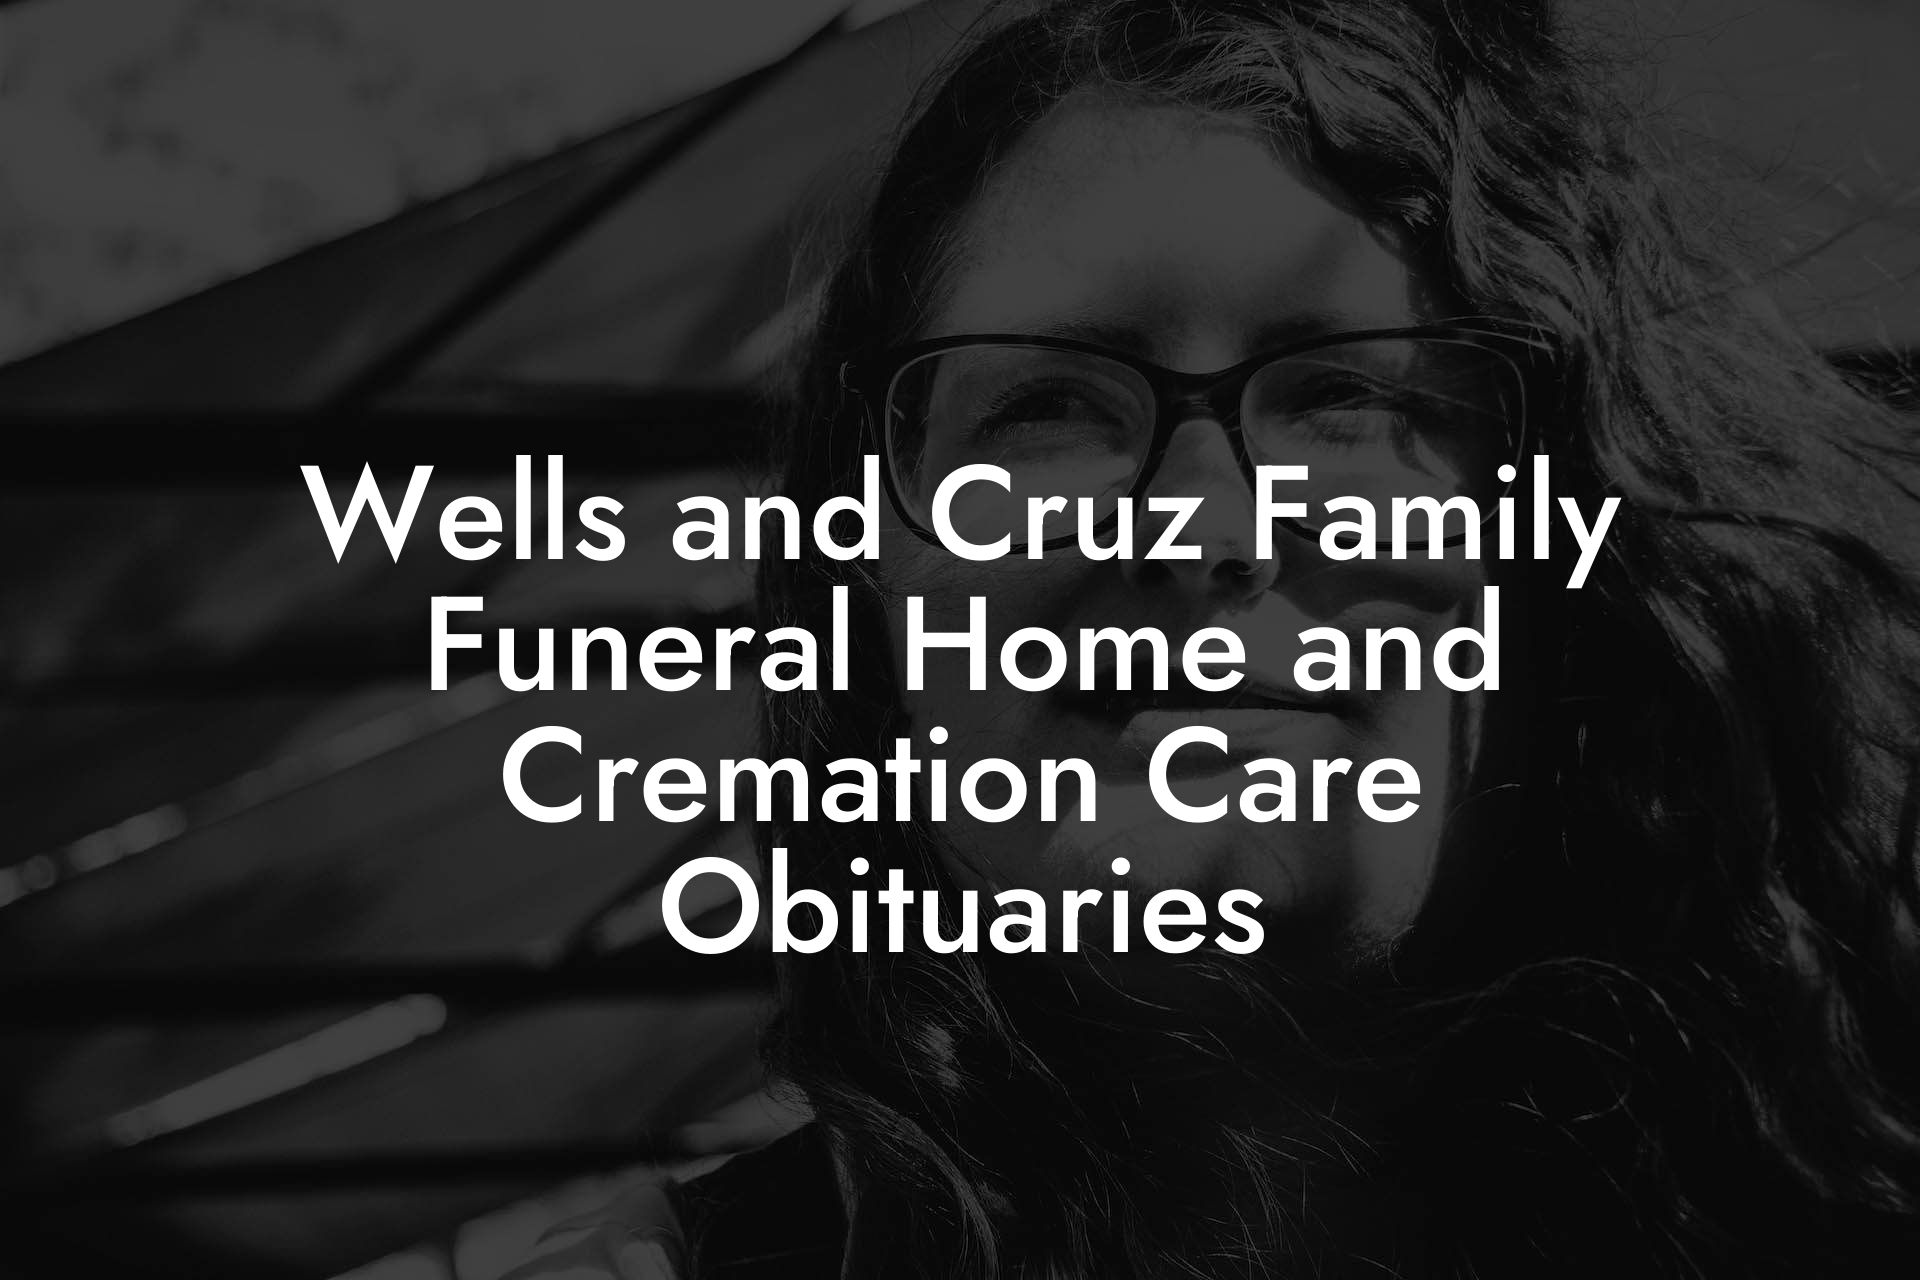 Wells and Cruz Family Funeral Home and Cremation Care Obituaries